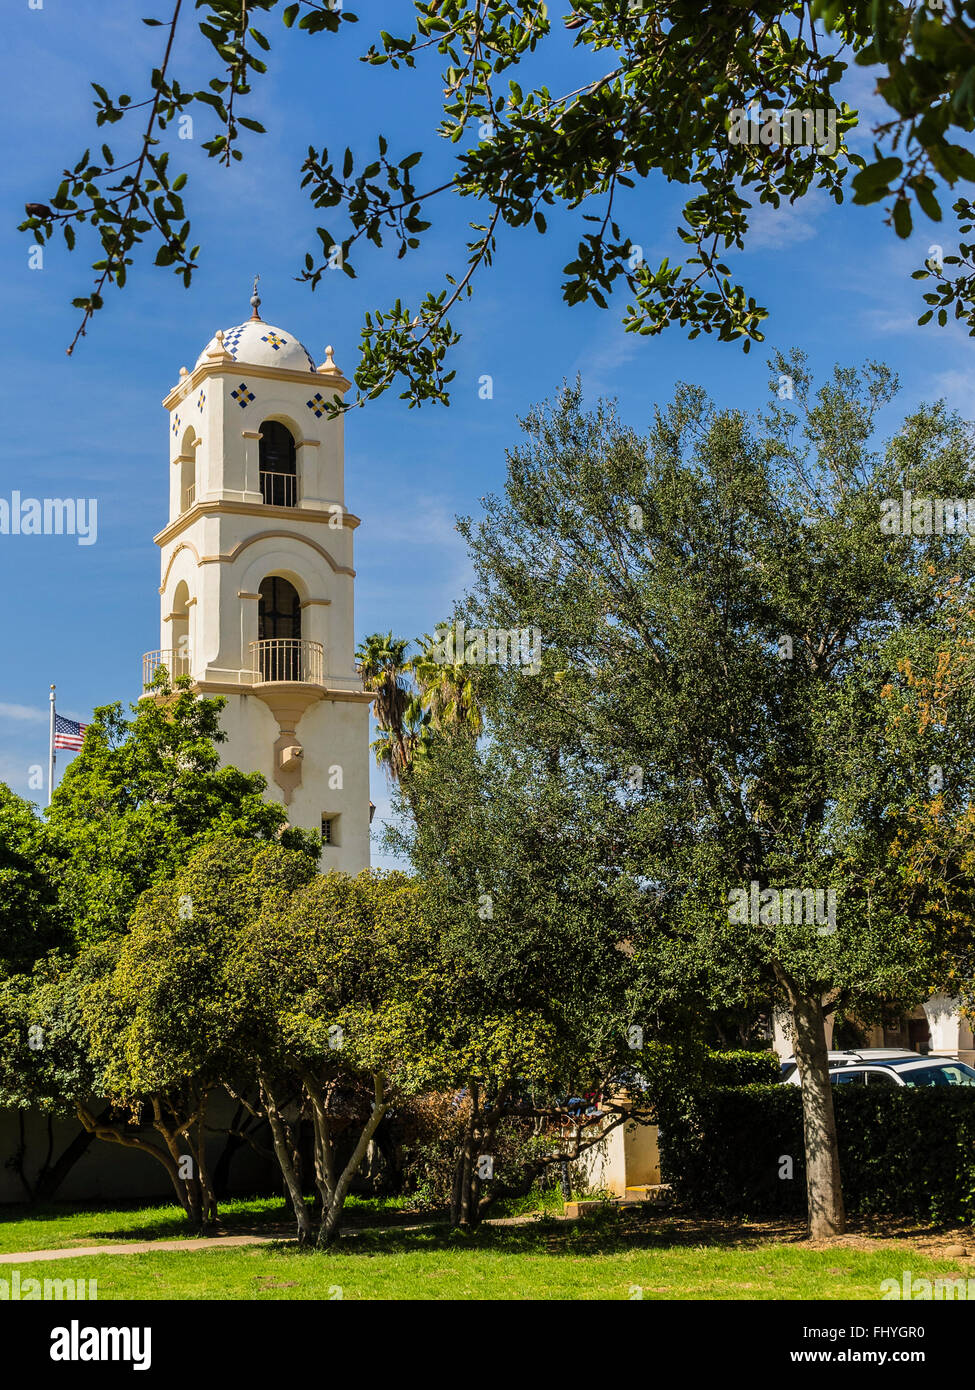 The historic colonial revival style Post Office Bell Tower, city historical landmark number 6 in Ojai, California. Stock Photo